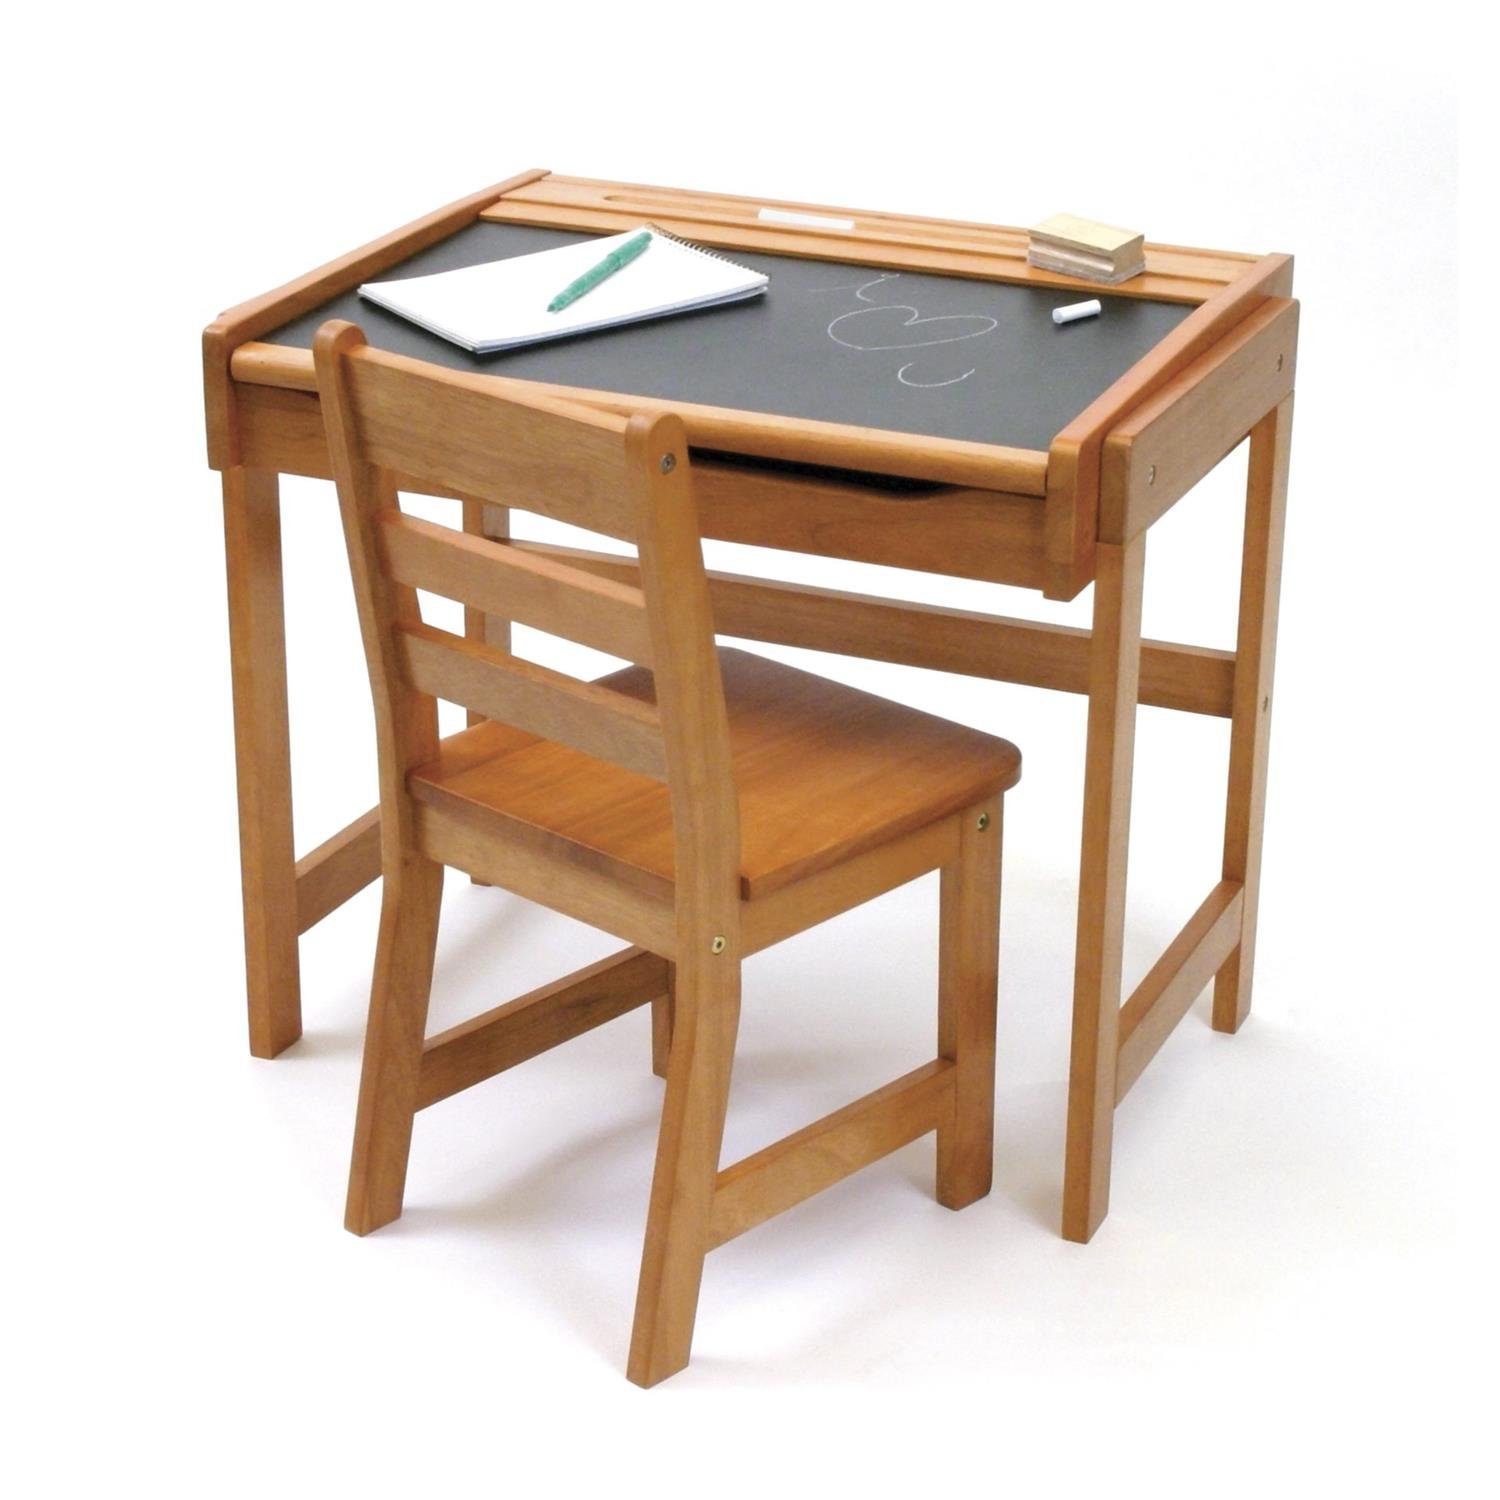 Kids Wooden Tables and Chairs Recommendations - Wooden ...